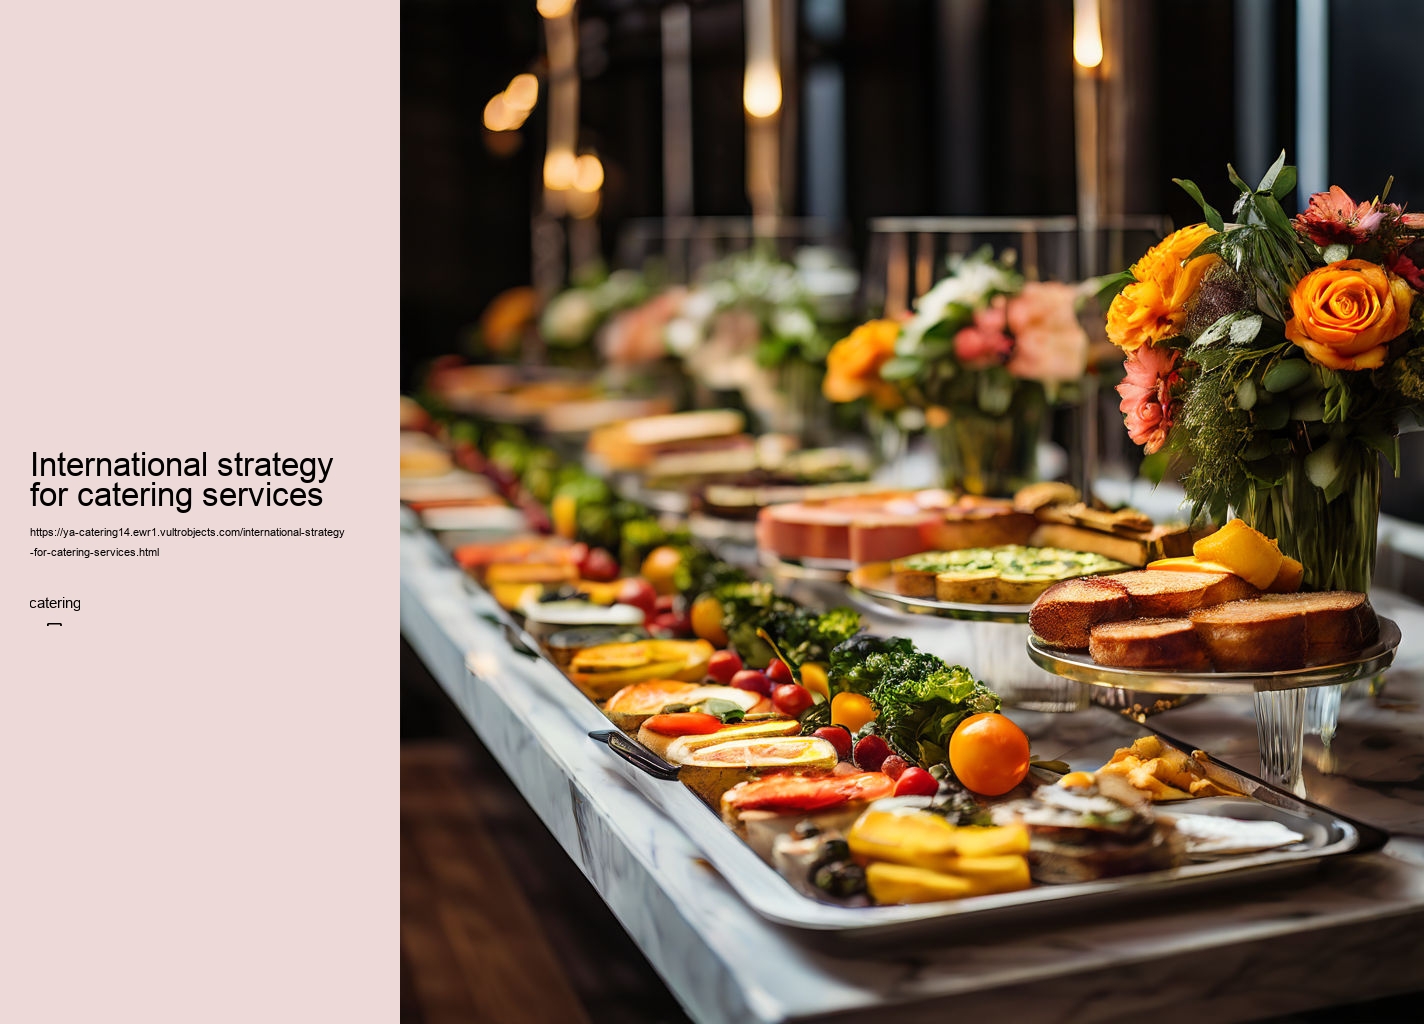 International strategy for catering services